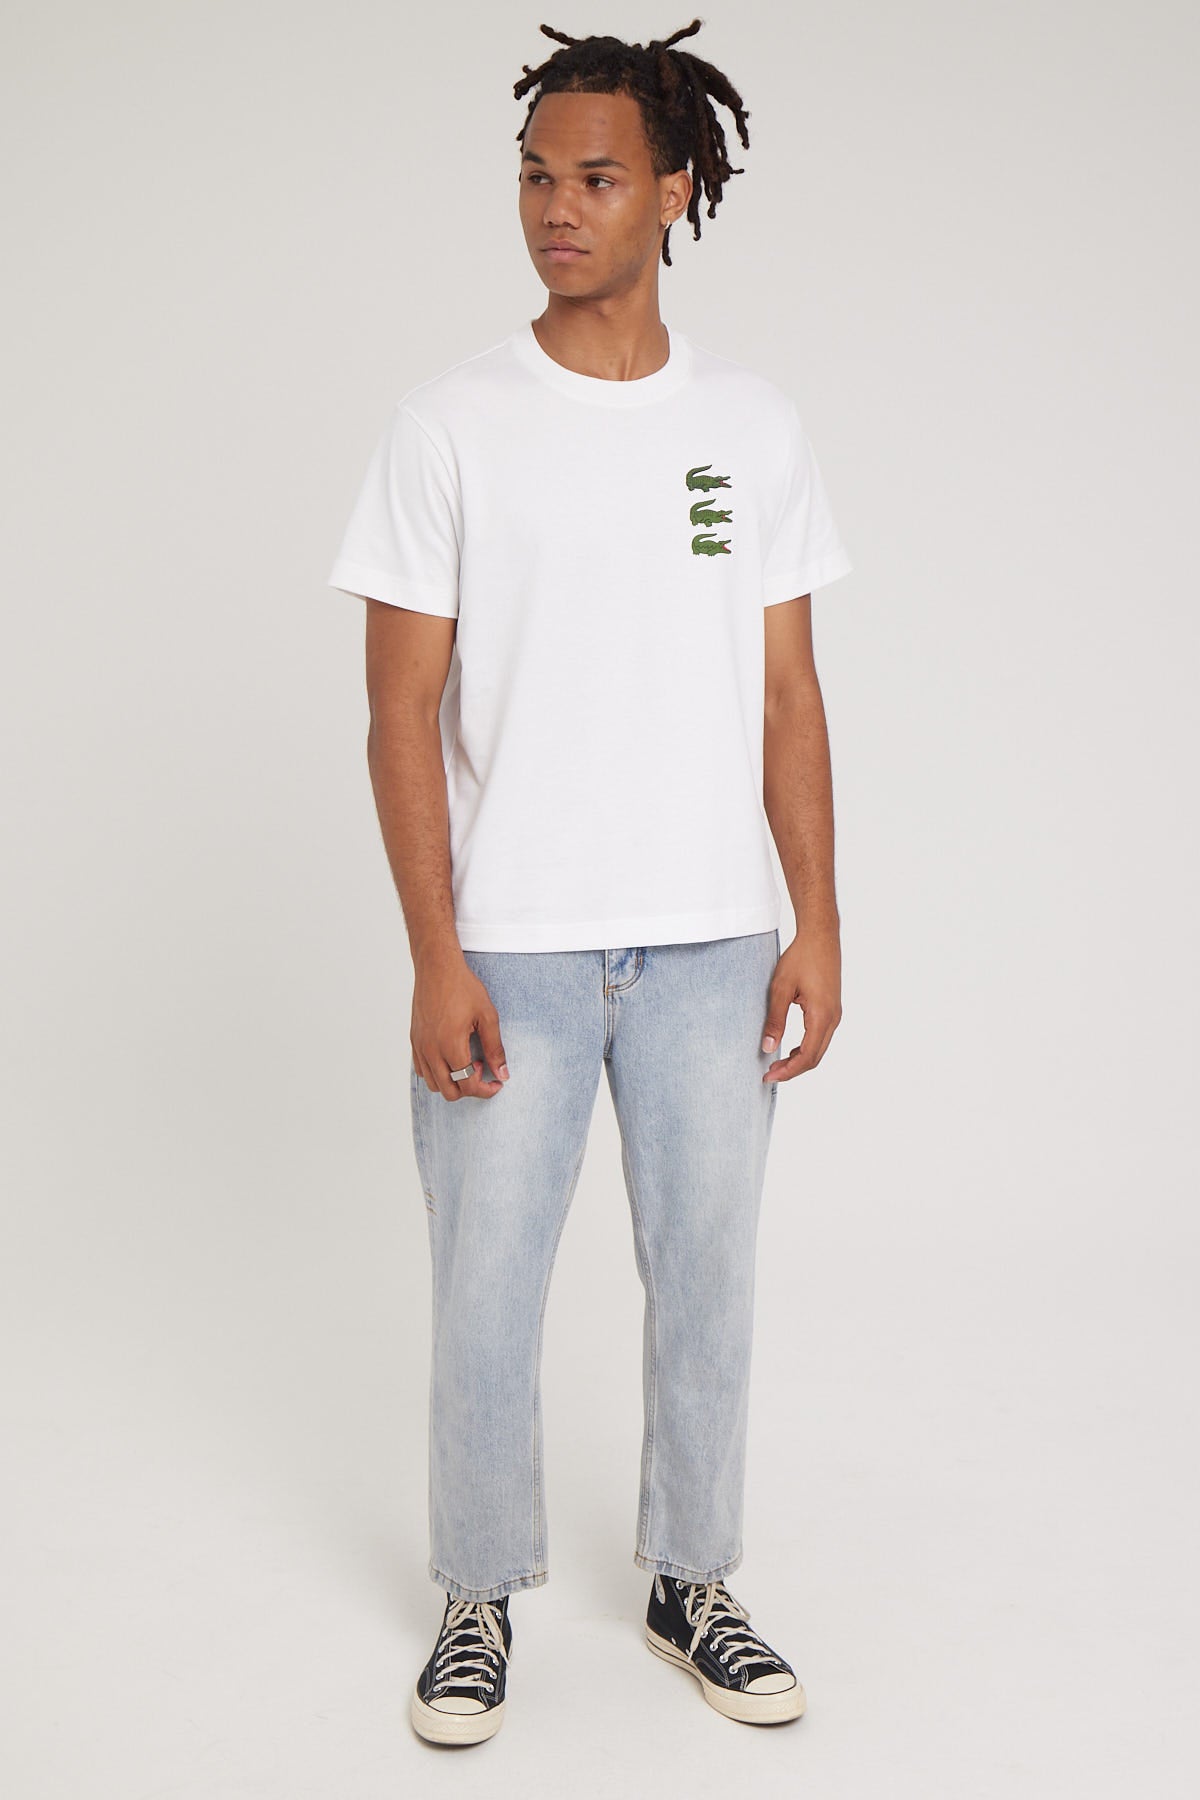 Lacoste Holiday Icons 3 Croc T-Shirt White